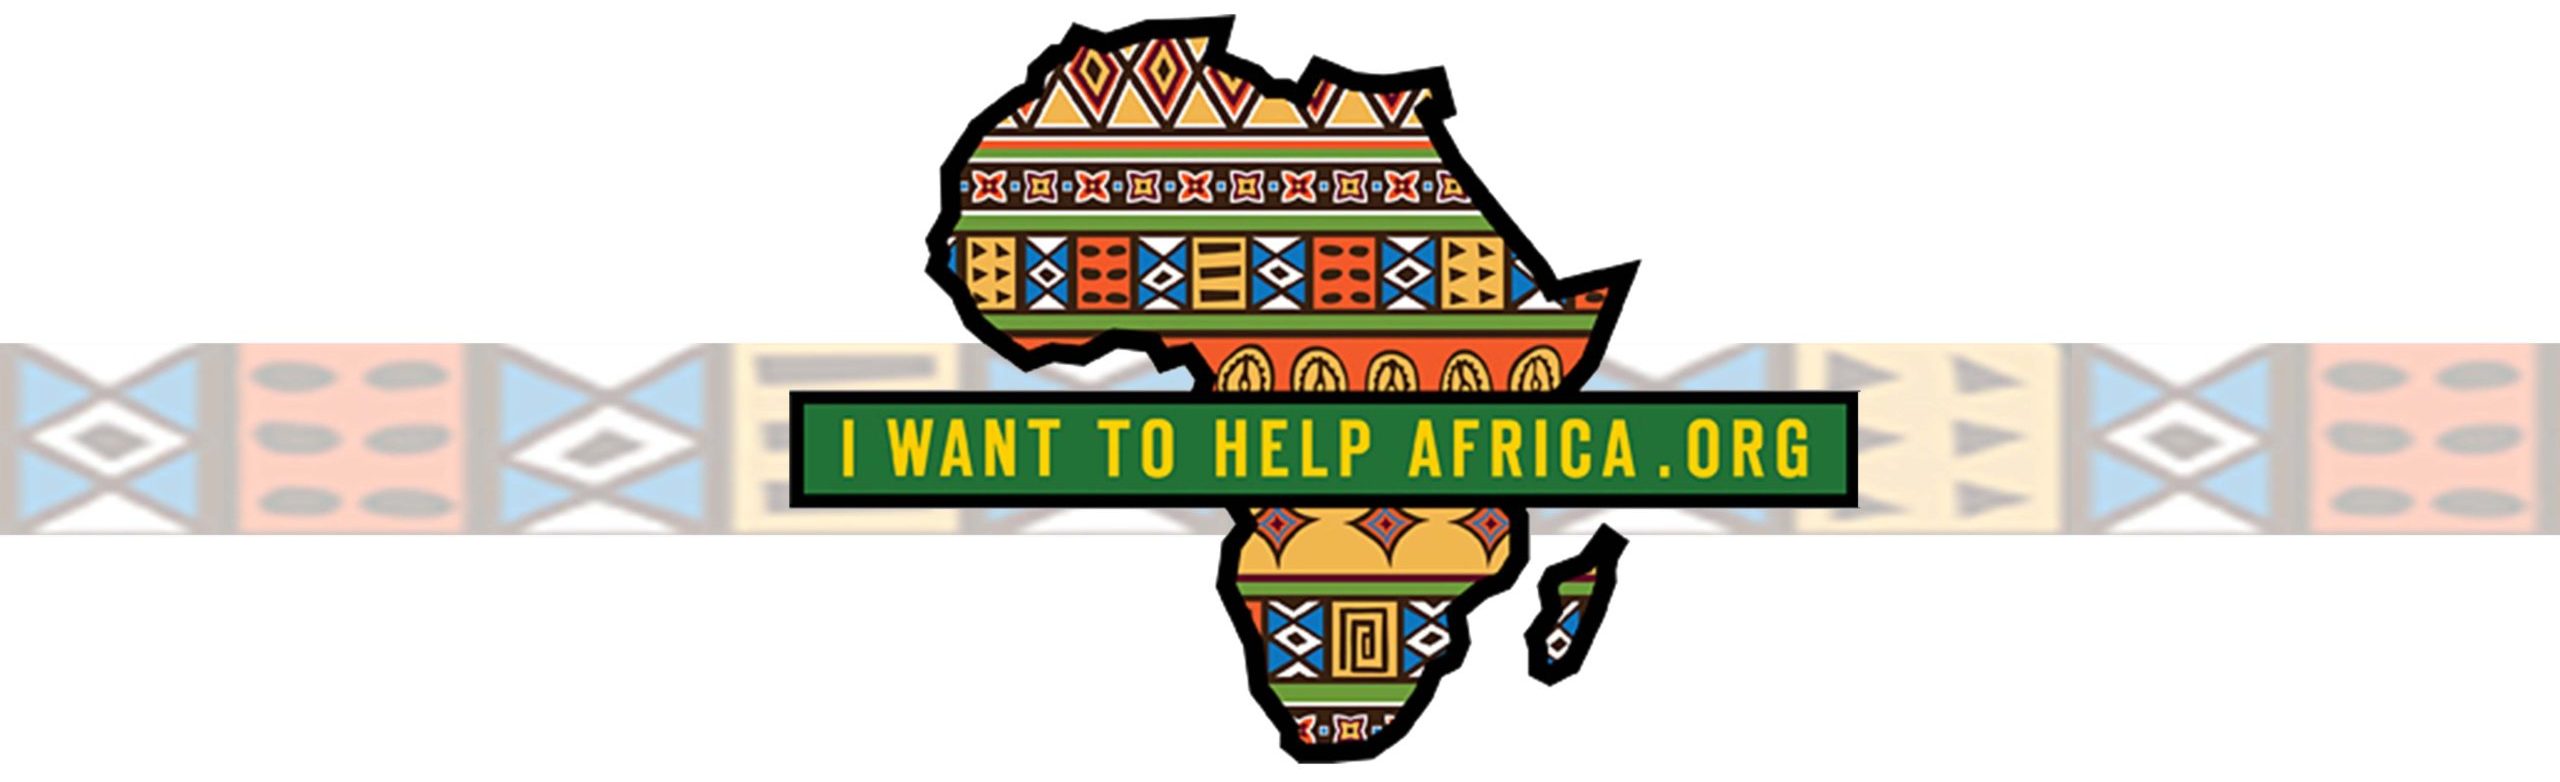 I Want To Help Africa, Inc.